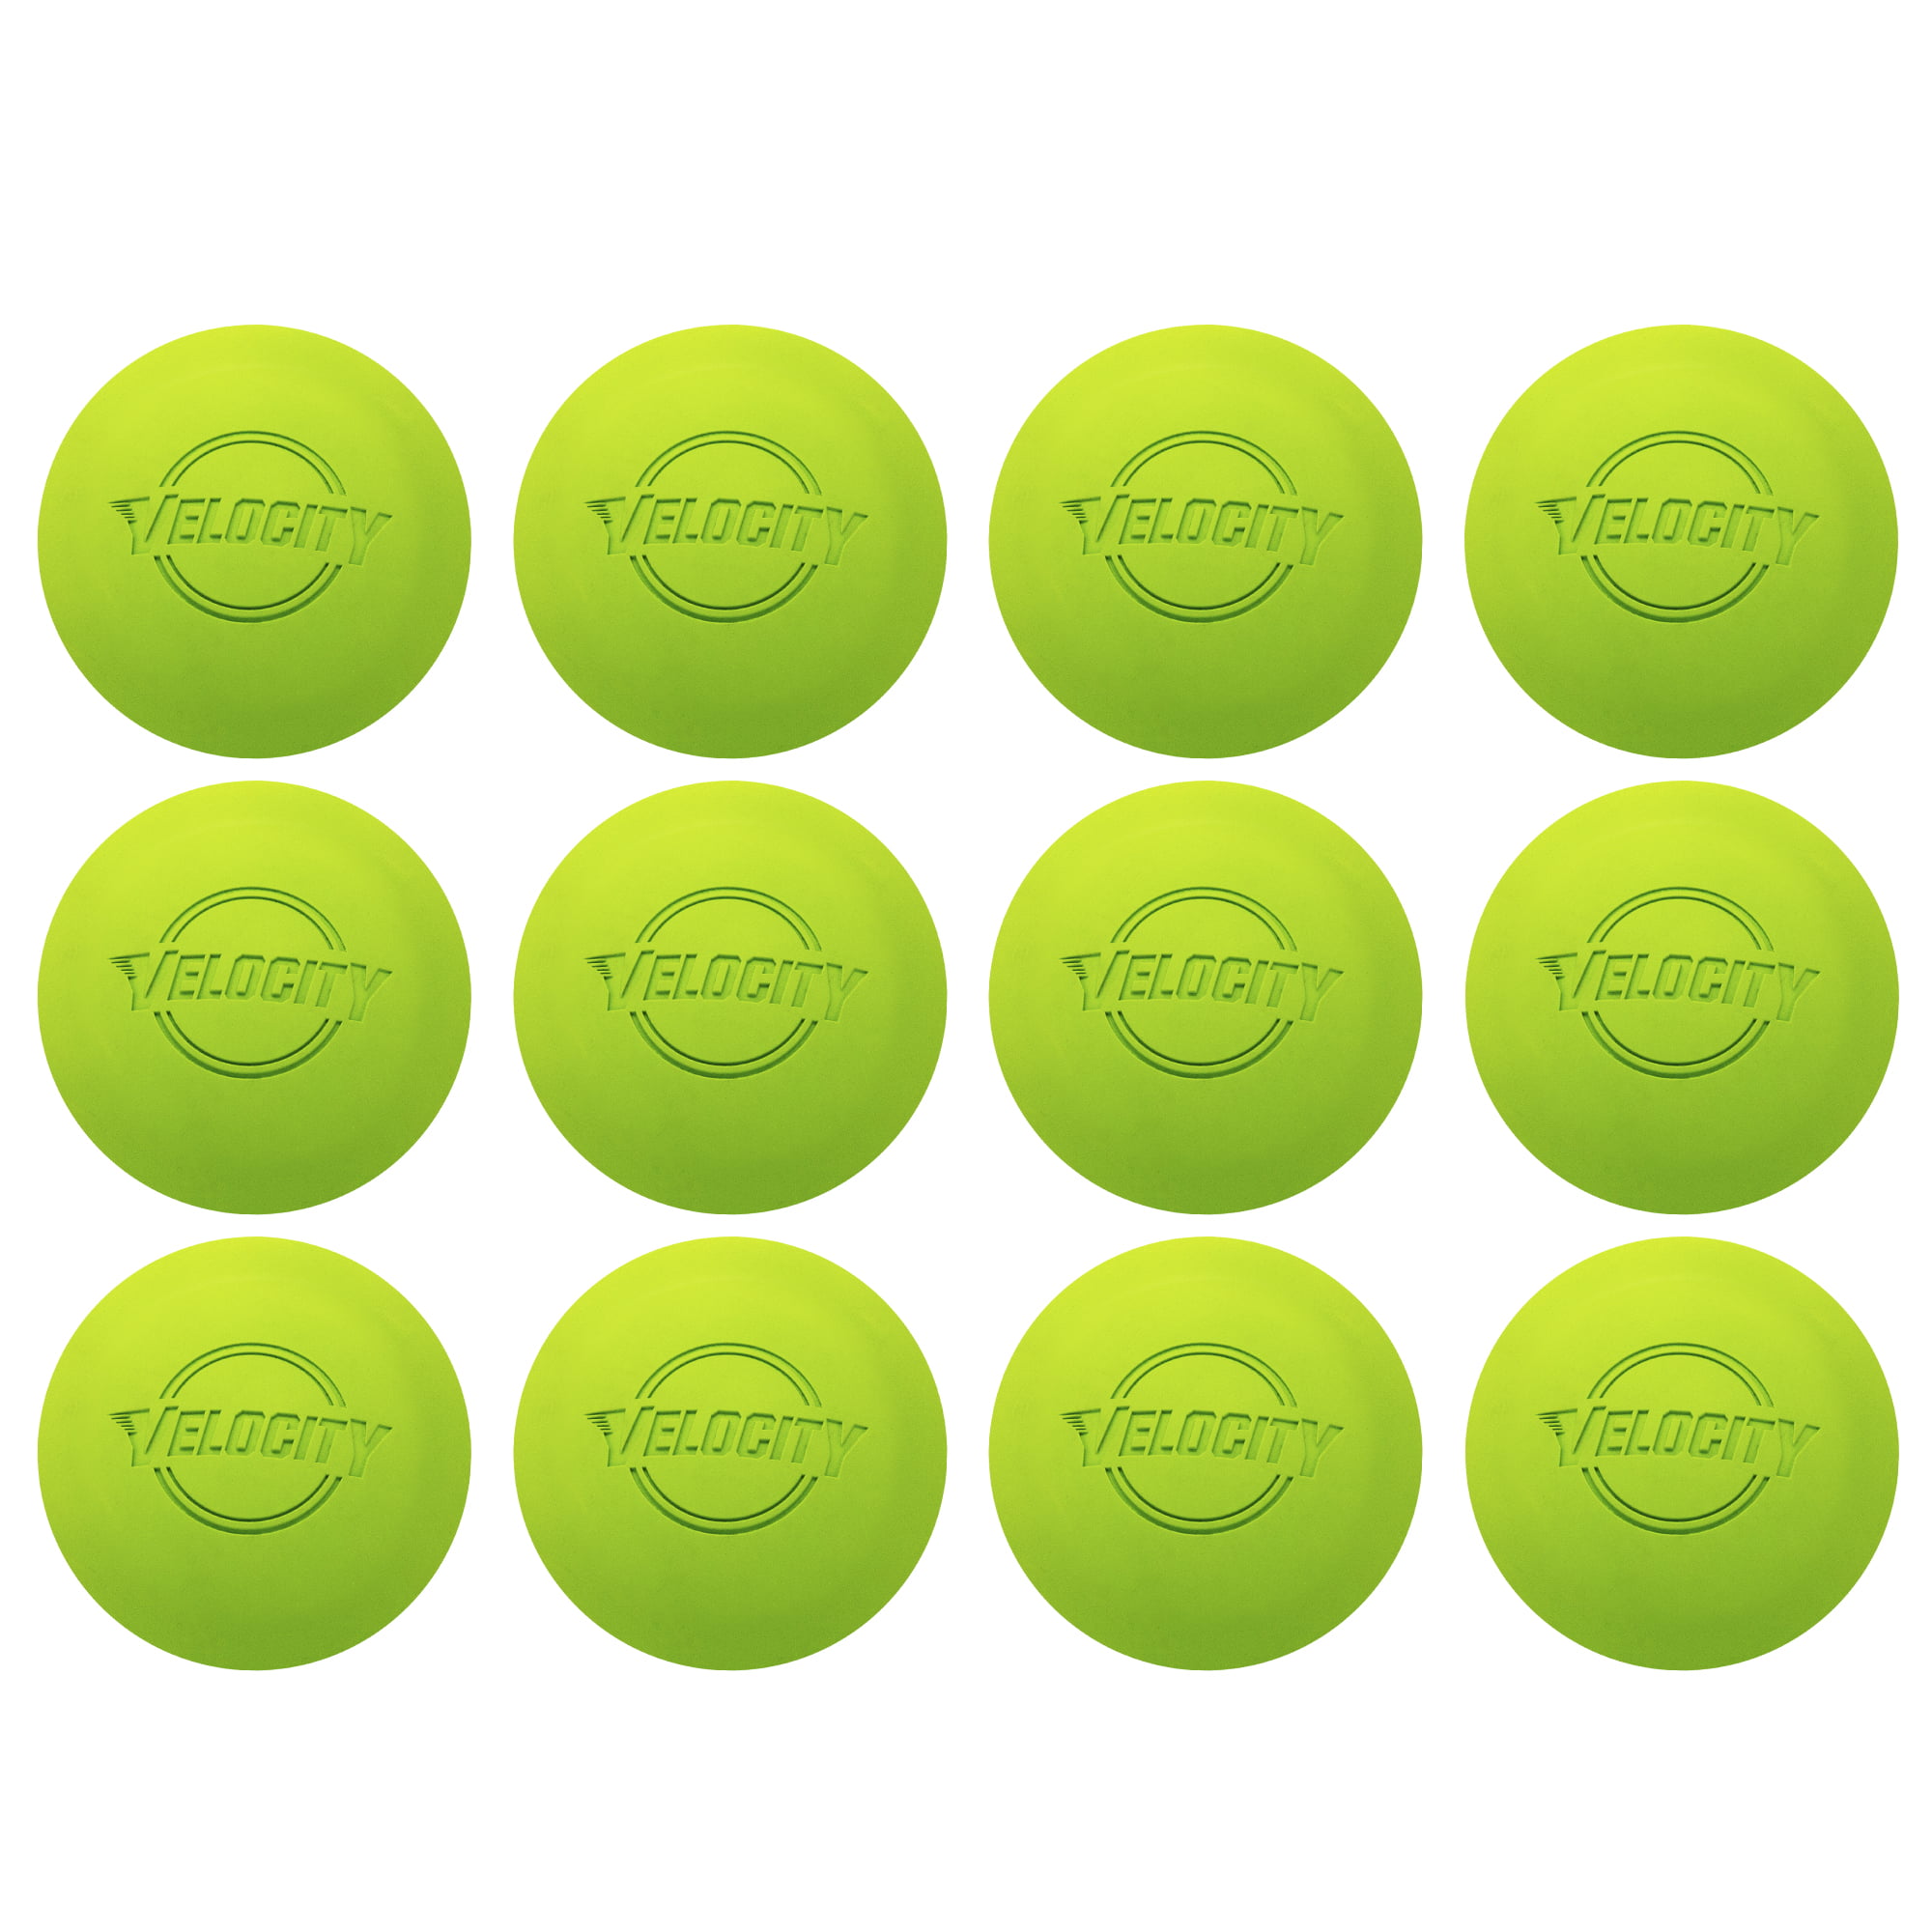 6 Velocity Lacrosse Balls 60 SEI 12 and 120 Packs 18 and College Approved Size Official NFHS 